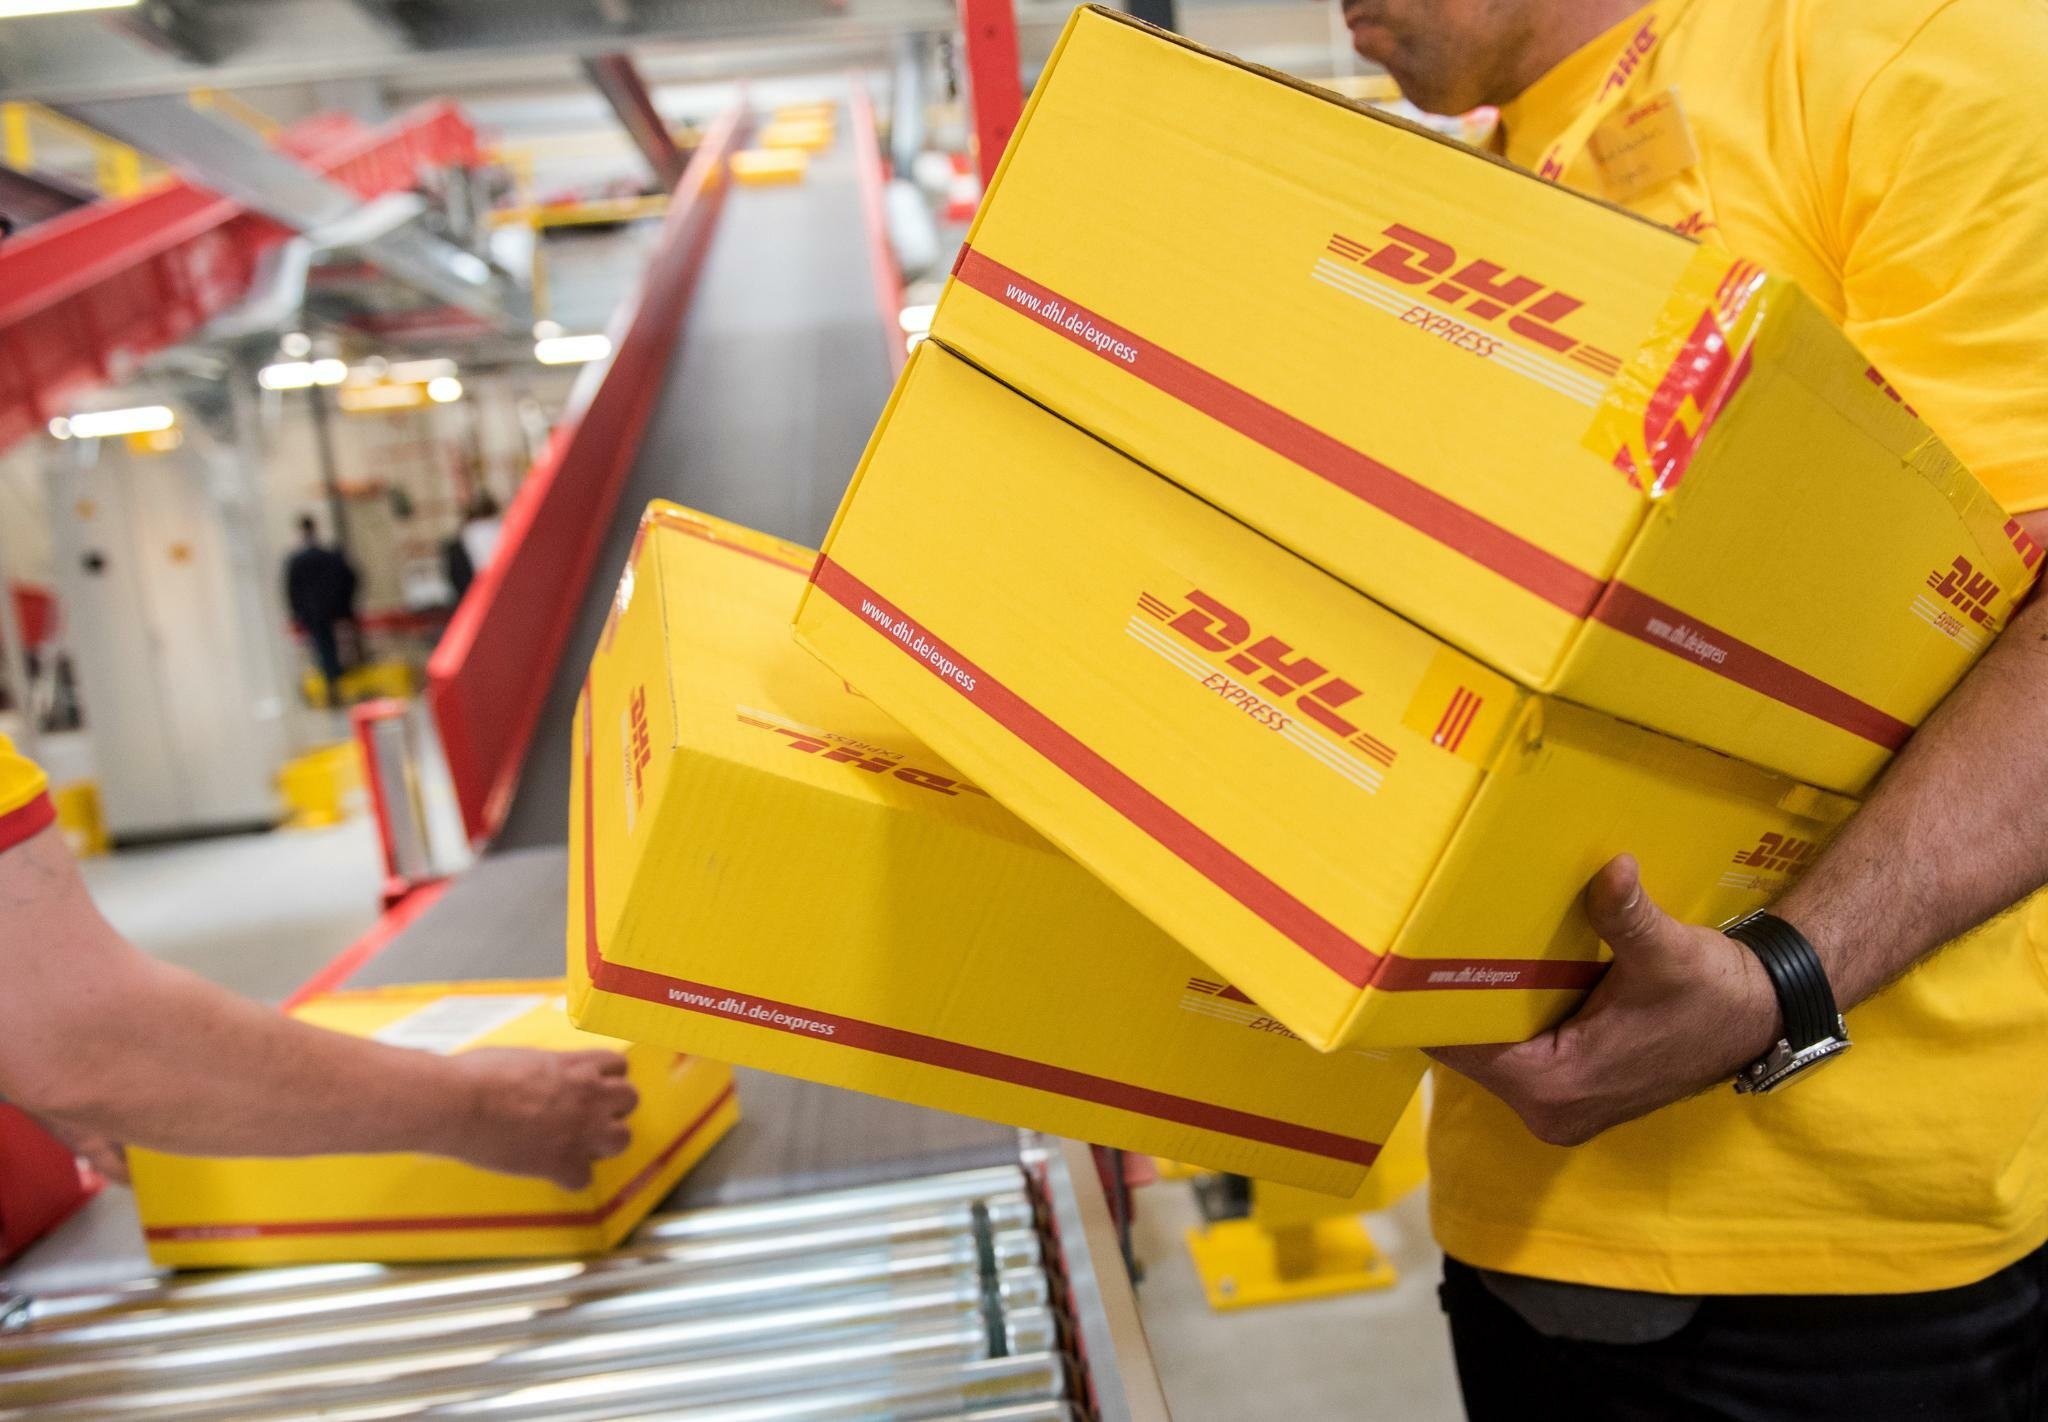 DHL: The company delivering over 1.3 billion parcels per year, Founded in 1969. 2050x1430 HD Wallpaper.